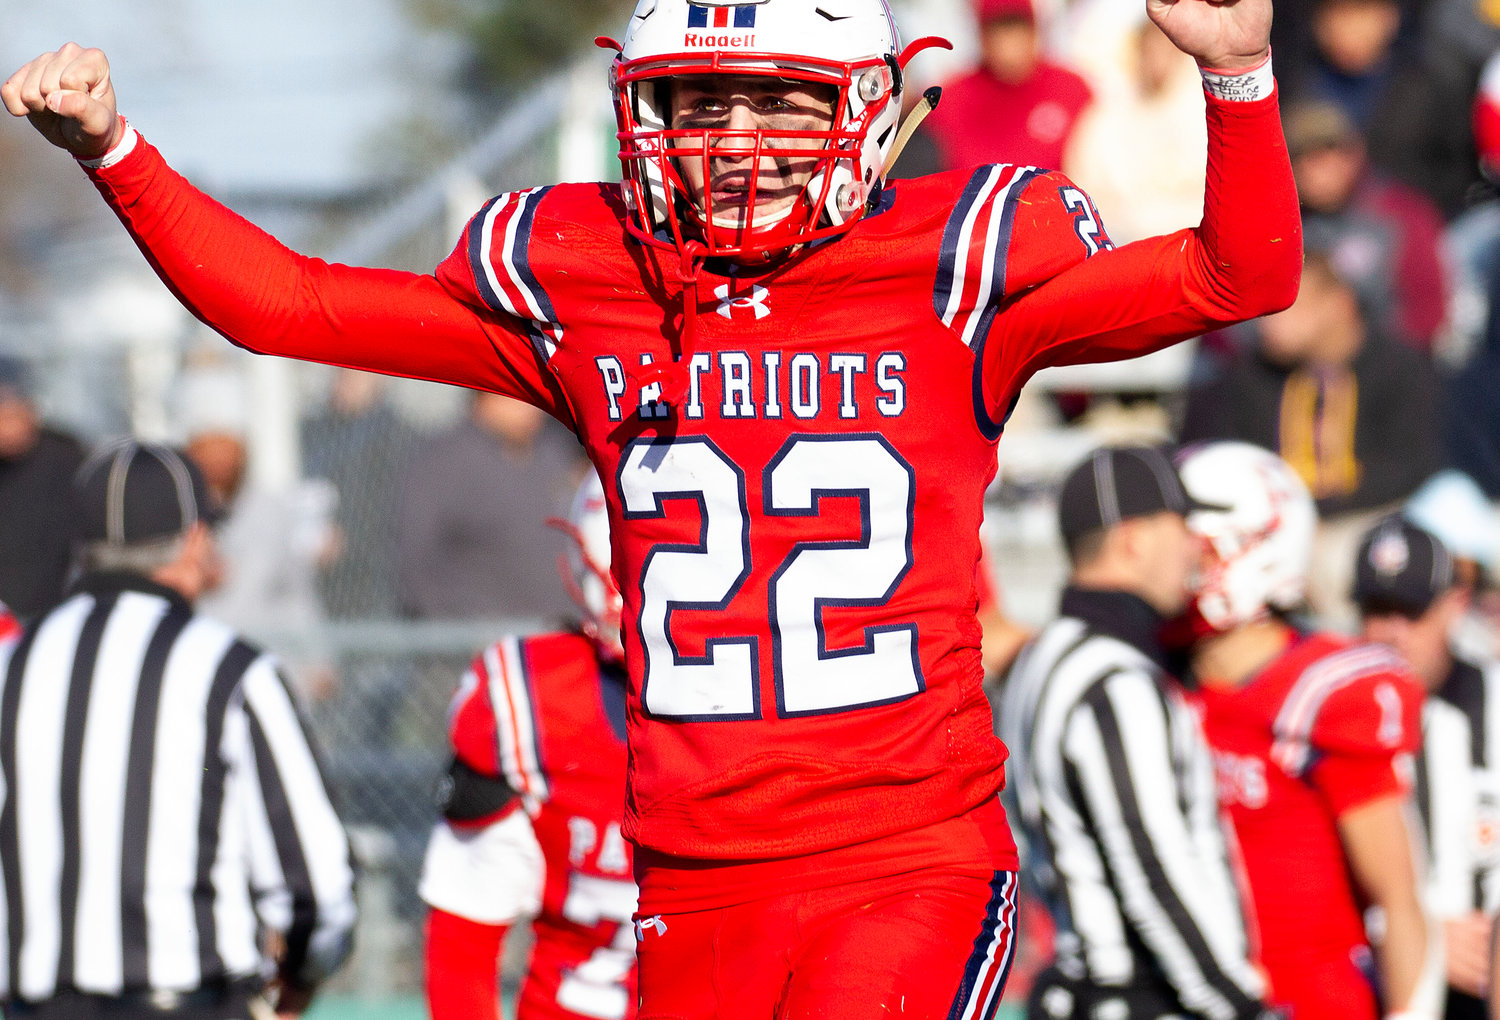 Dylan Brandariz celebrates after stopping a St. Ray’s rushing attempt in the fourth quarter.